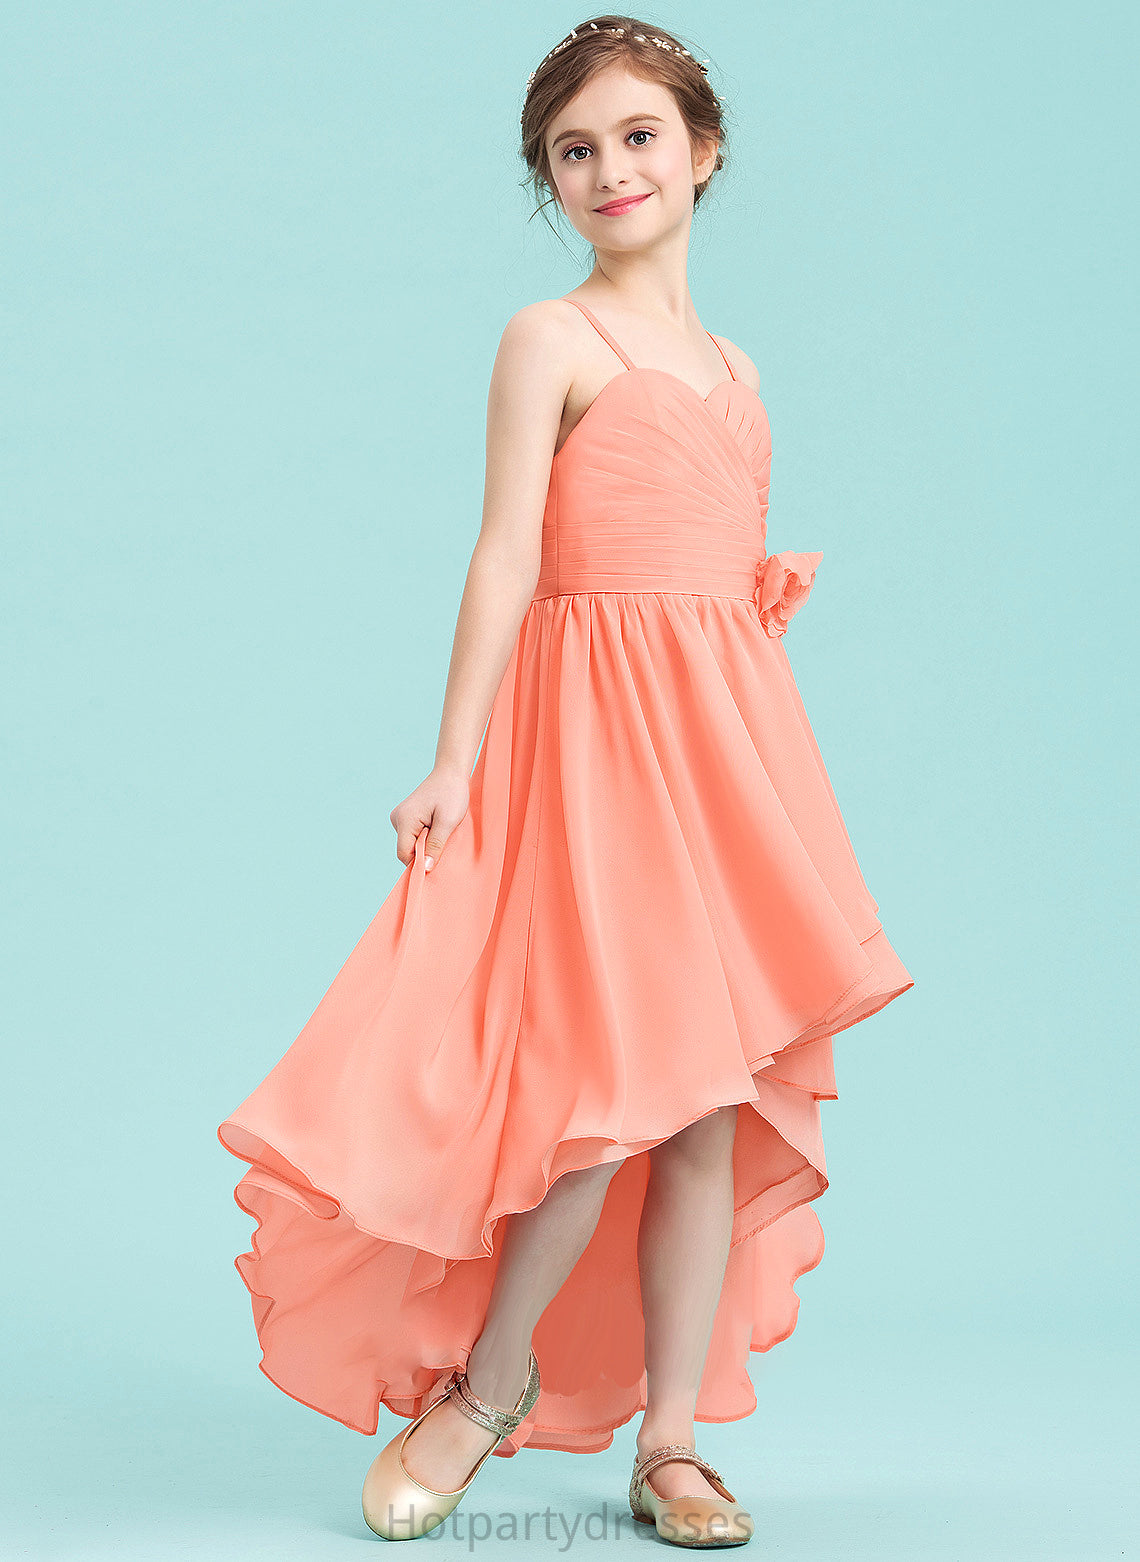 With Junior Bridesmaid Dresses Ruffle Chiffon A-Line Emely Sweetheart Flower(s) Asymmetrical